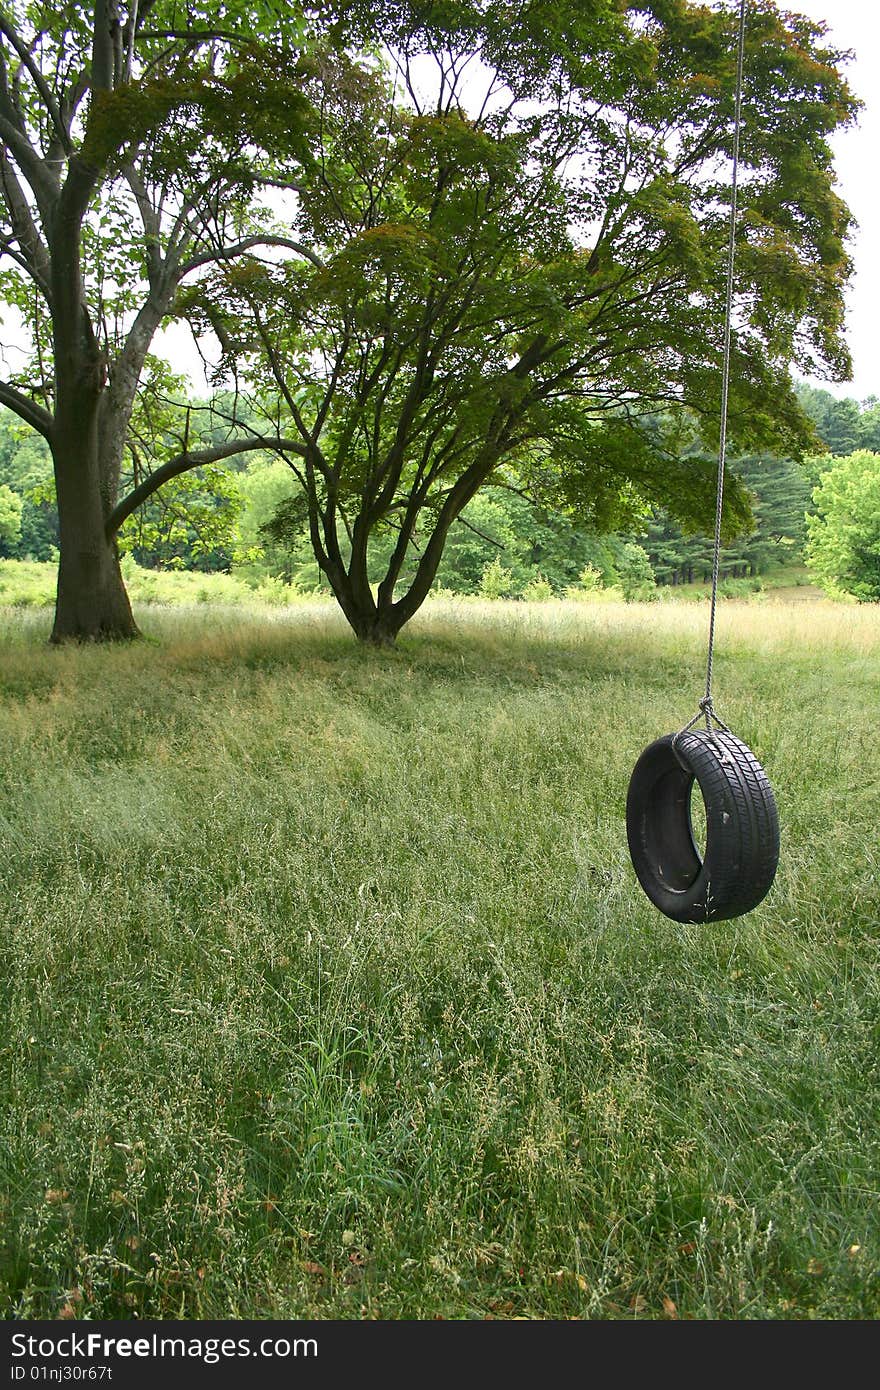 Old swing made with a wheel hanging from a tree.